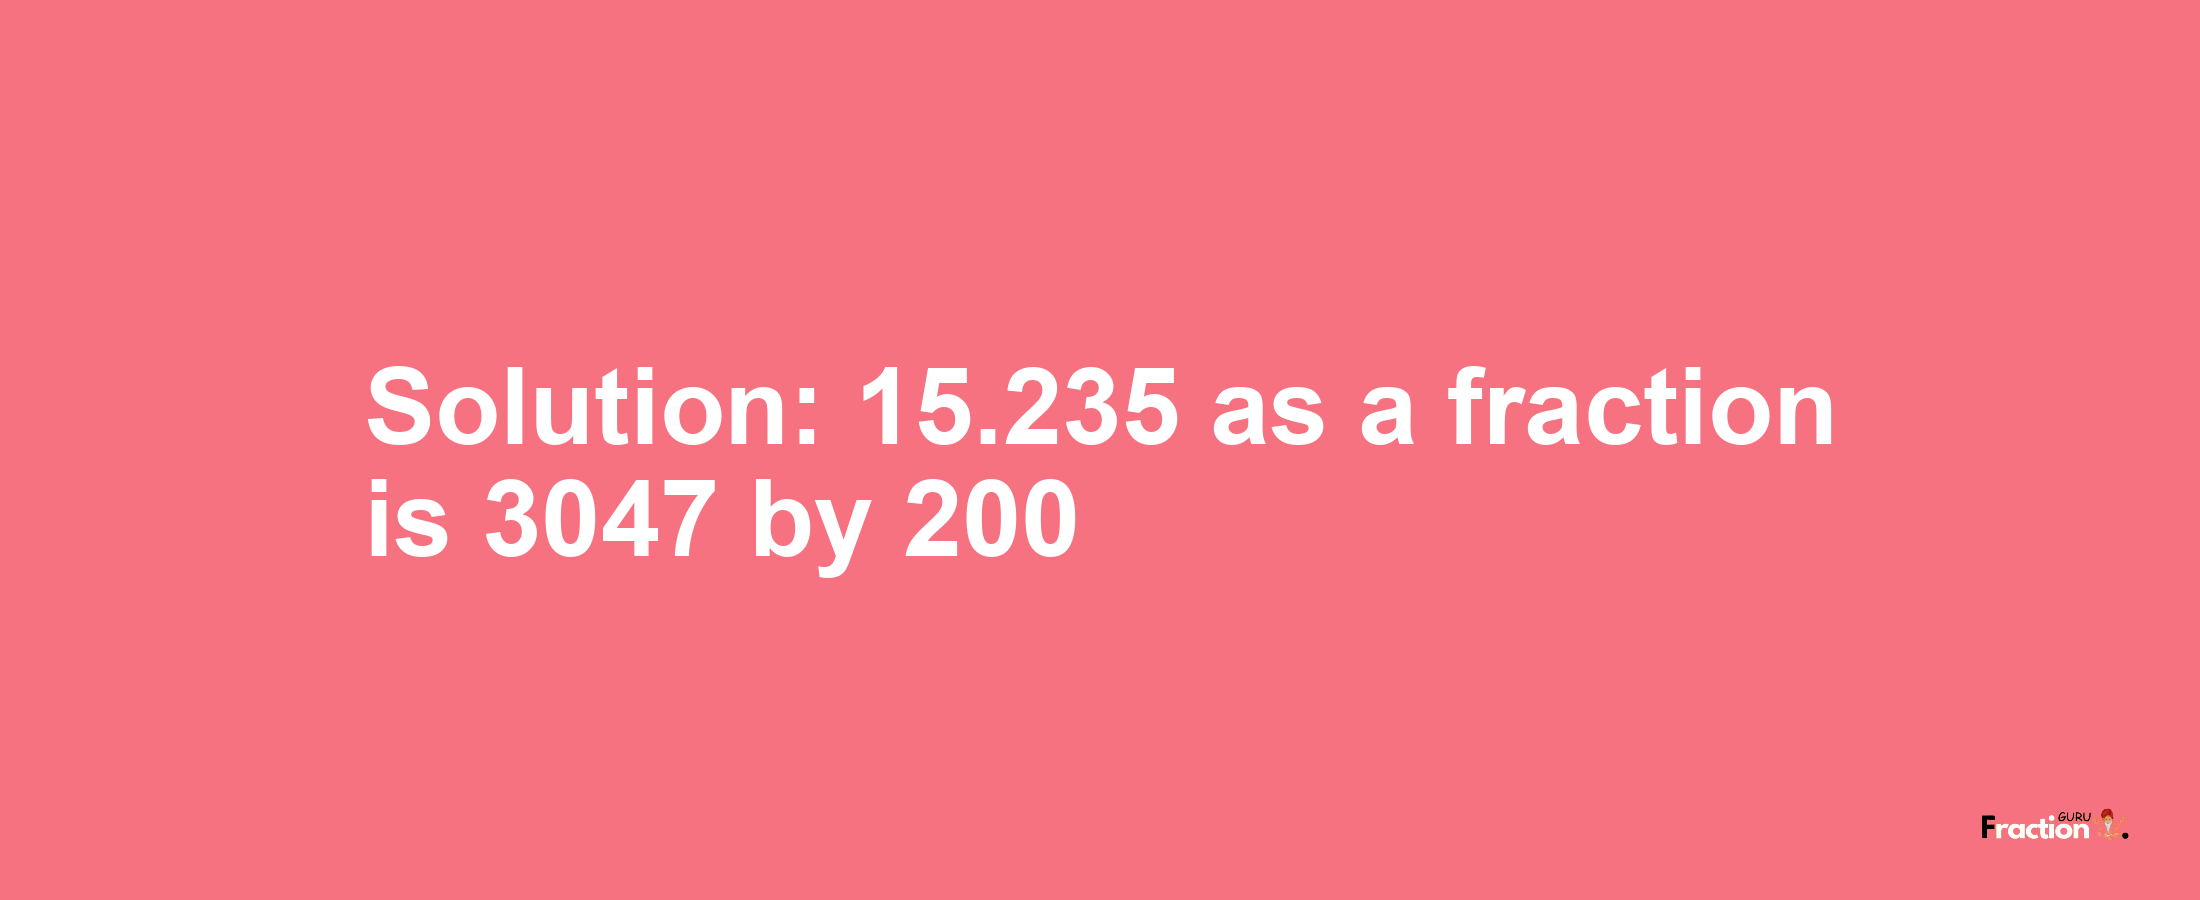 Solution:15.235 as a fraction is 3047/200